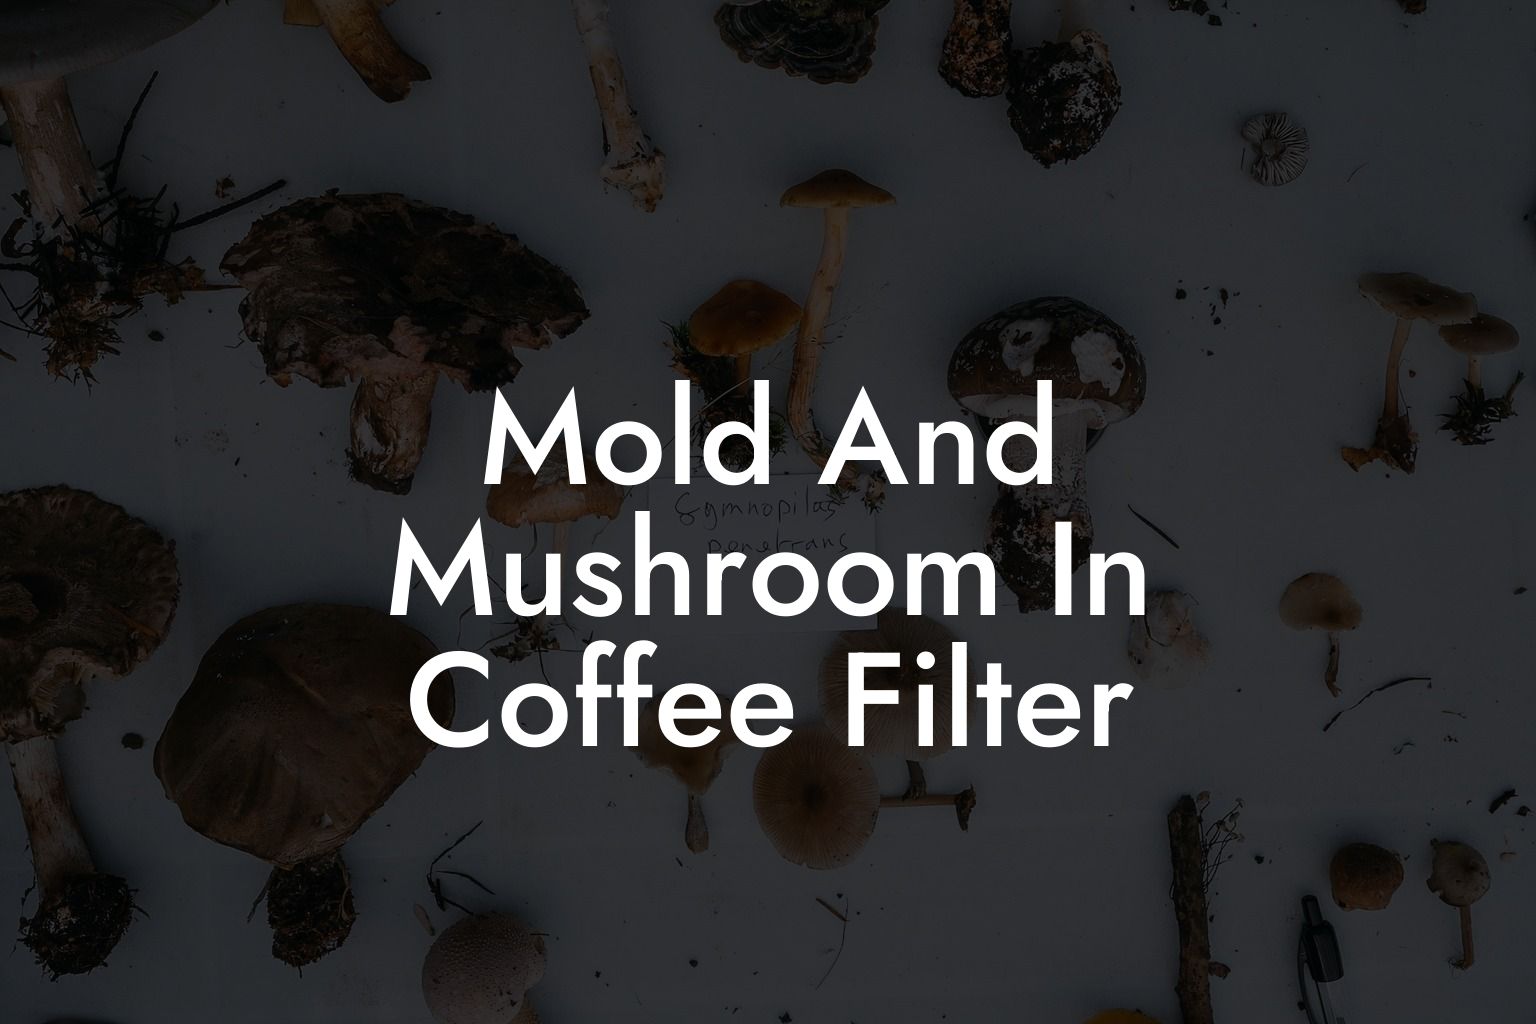 Mold And Mushroom In Coffee Filter